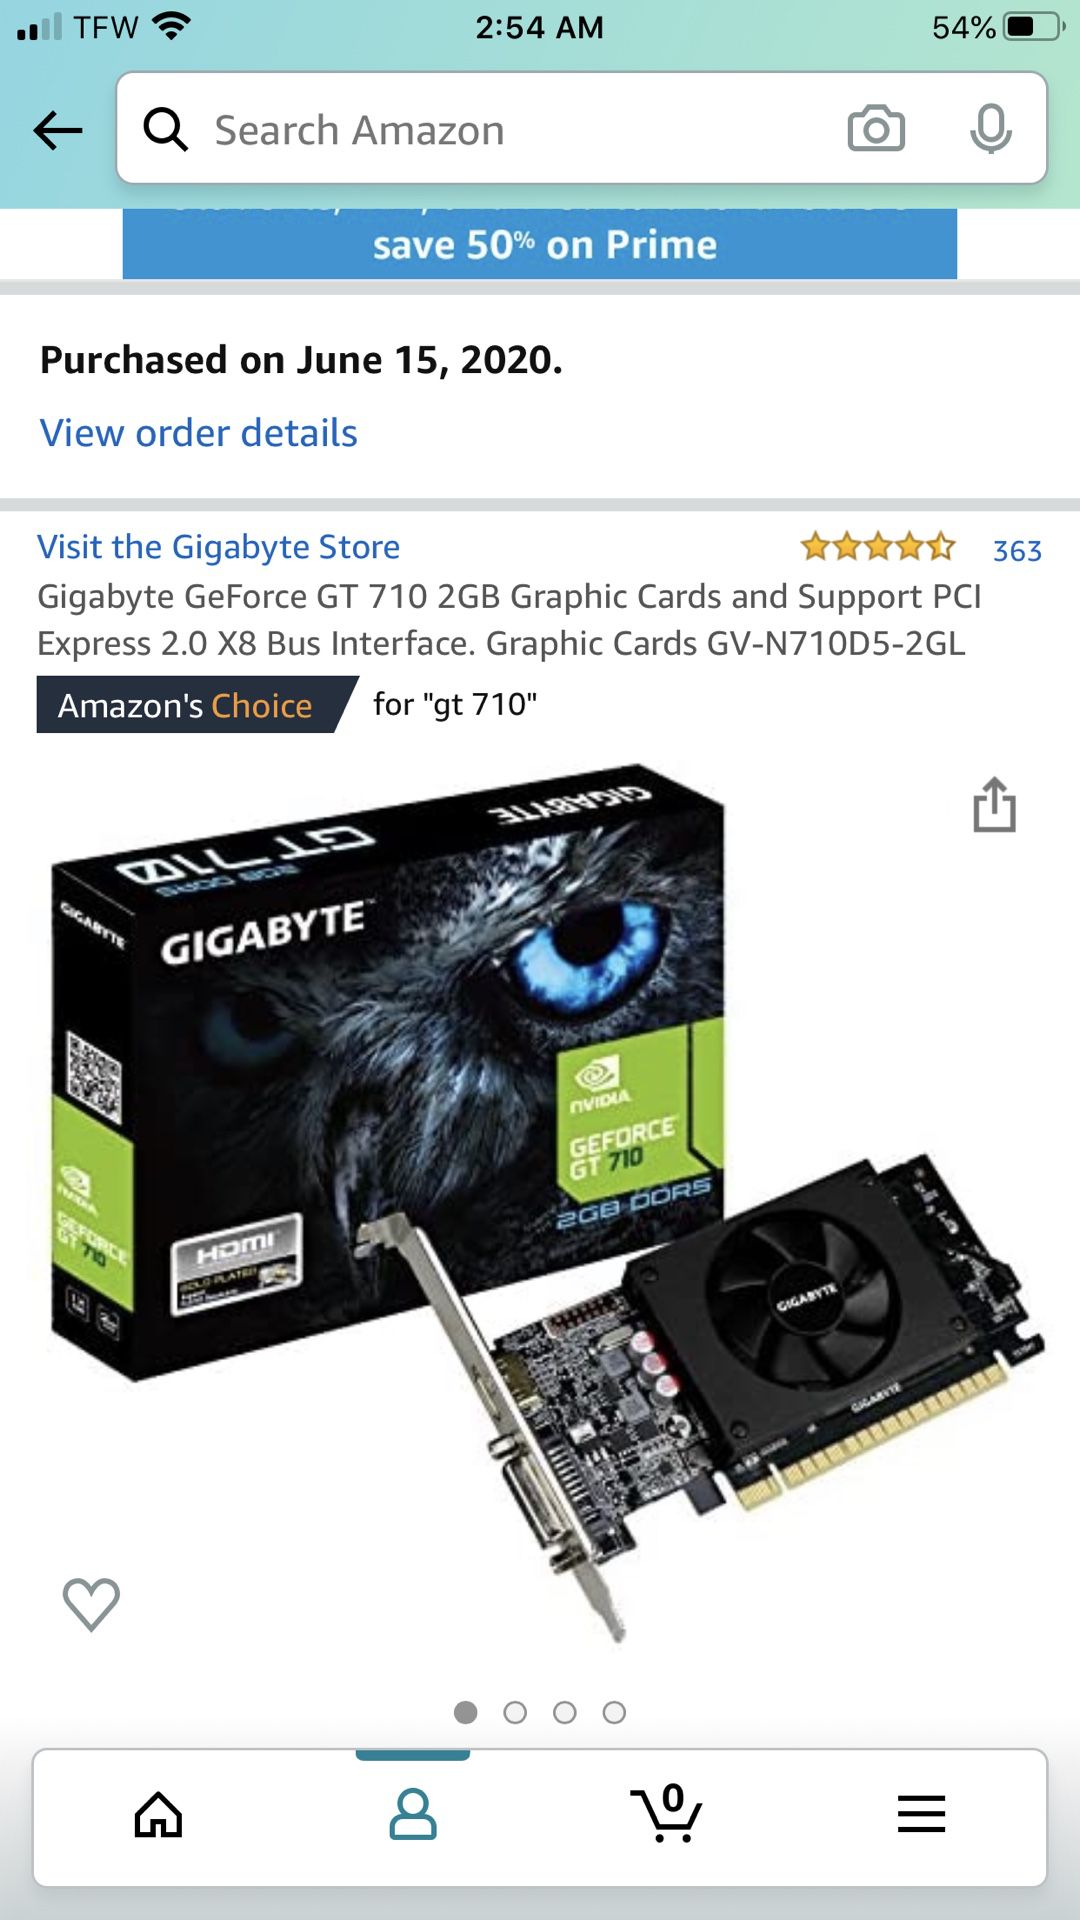 Gigabyte GeForce GT 710 2GB Graphic Cards and Support PCI Express 2.0 X8  Bus Interface. Graphic Cards GV-N710D5-2GL